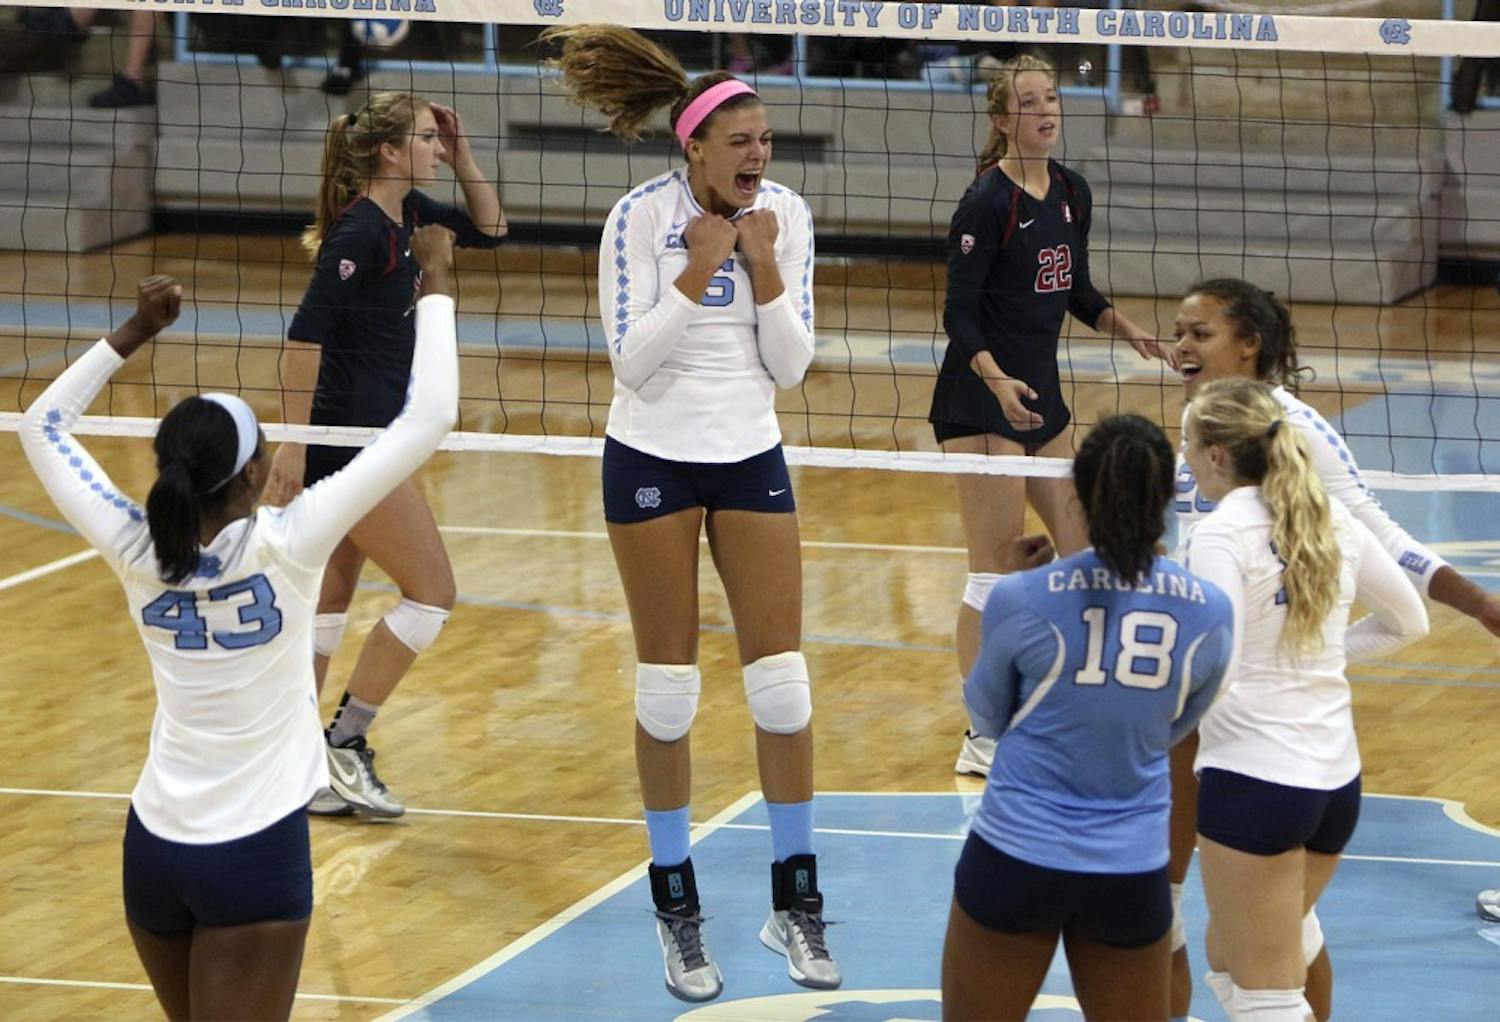 The UNC volleyball team defeated Stanford 3 matches to 0 on Thursday evening.